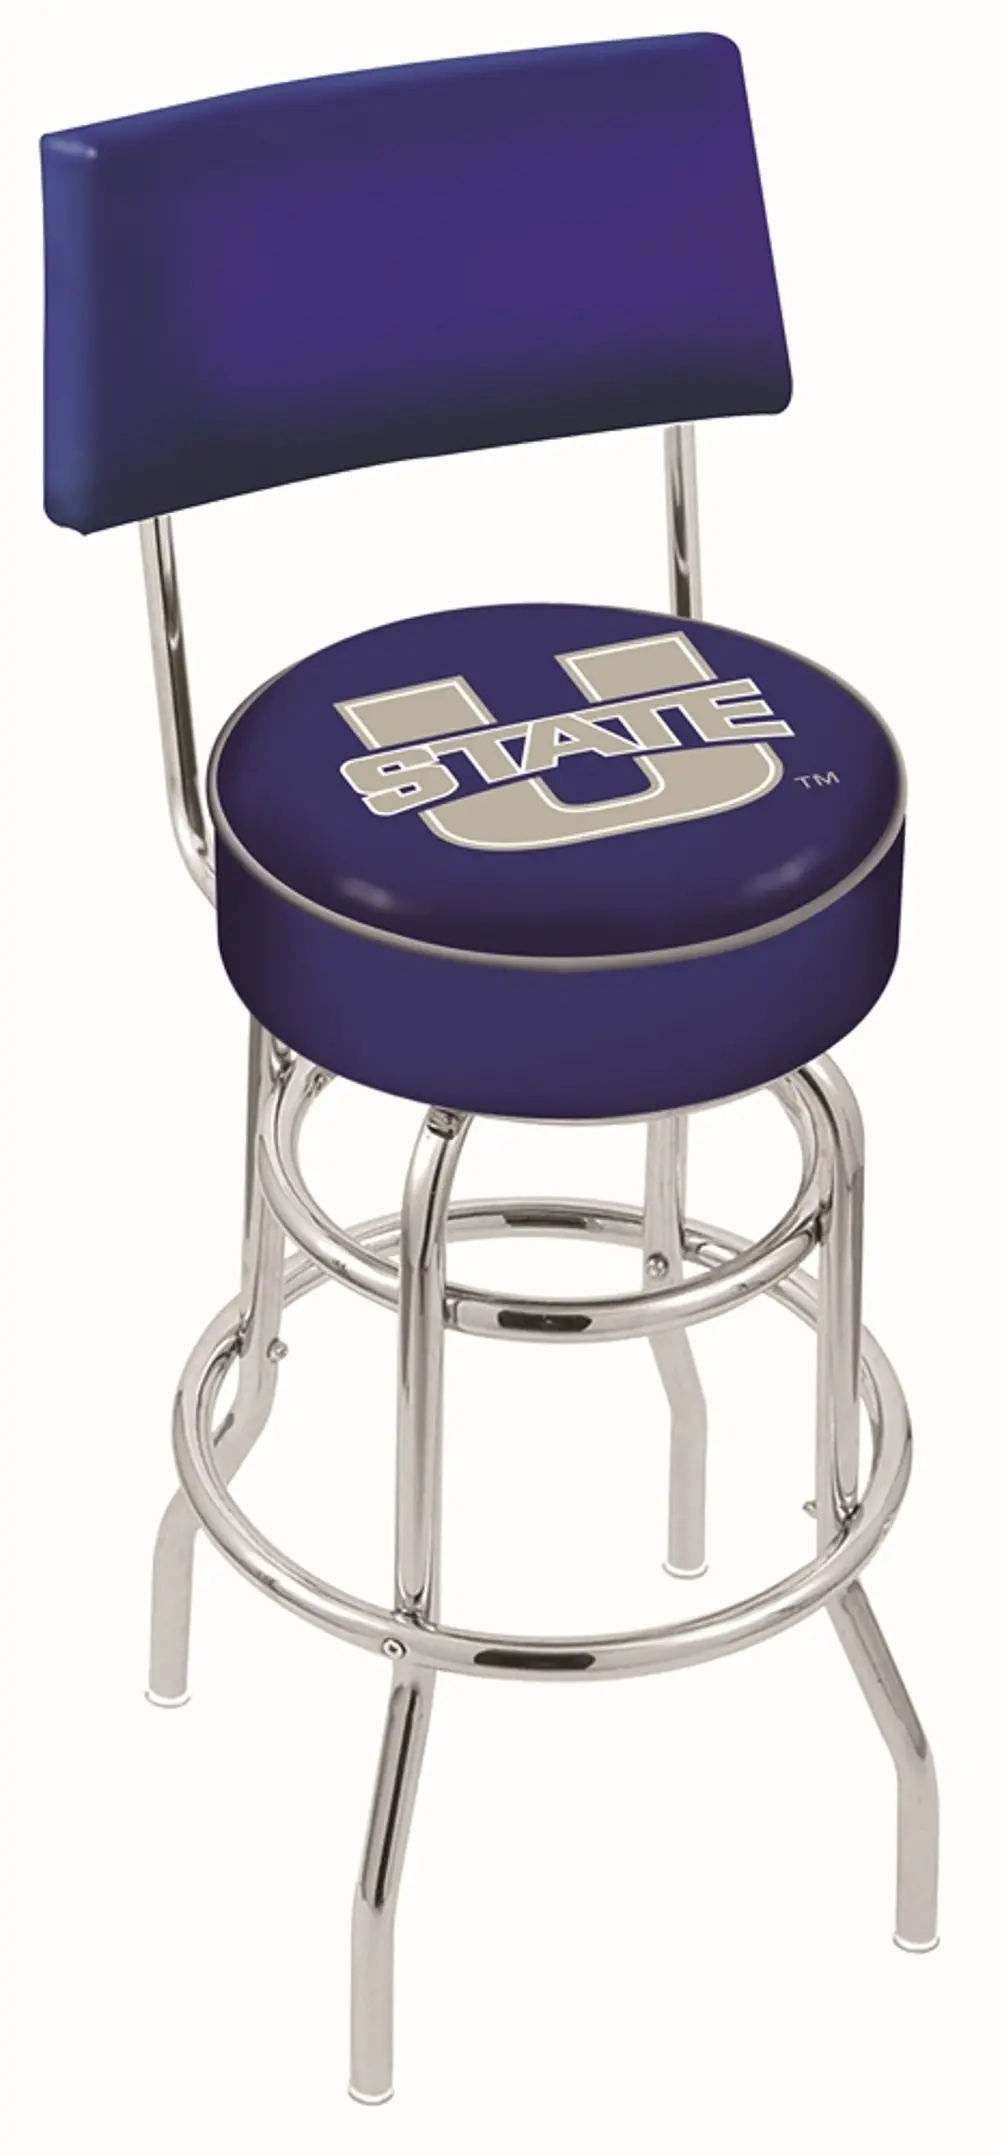 Chrome Swivel Counter Height Stool with Back Rest - USU-1